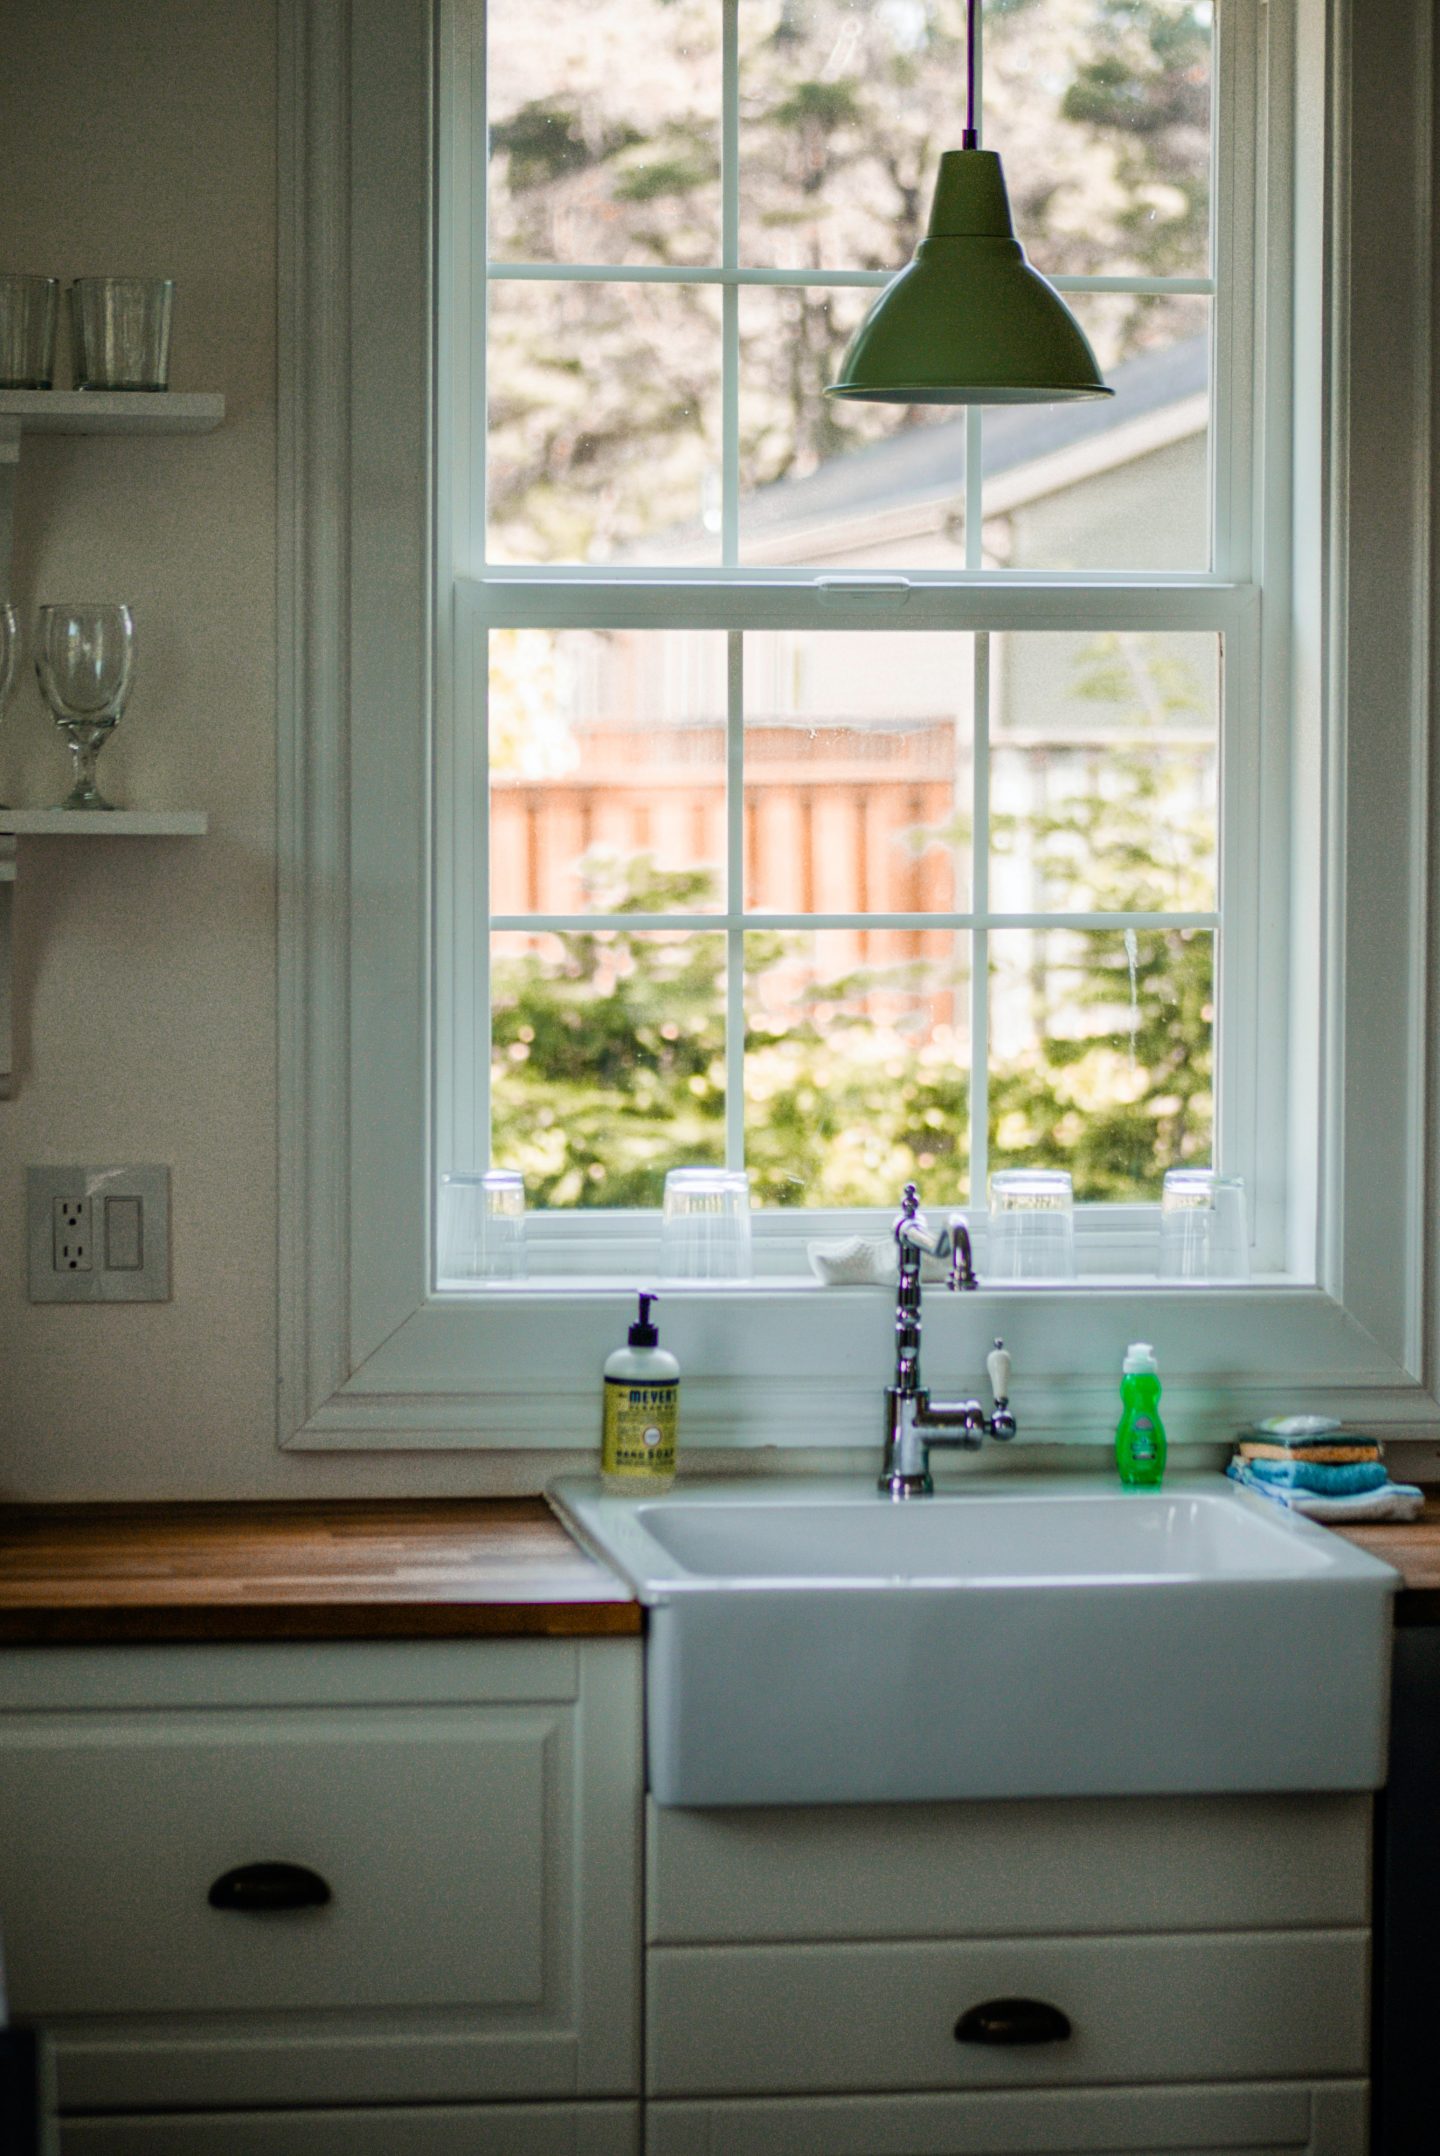 Kitchen sink and faucet with farmhouse style.